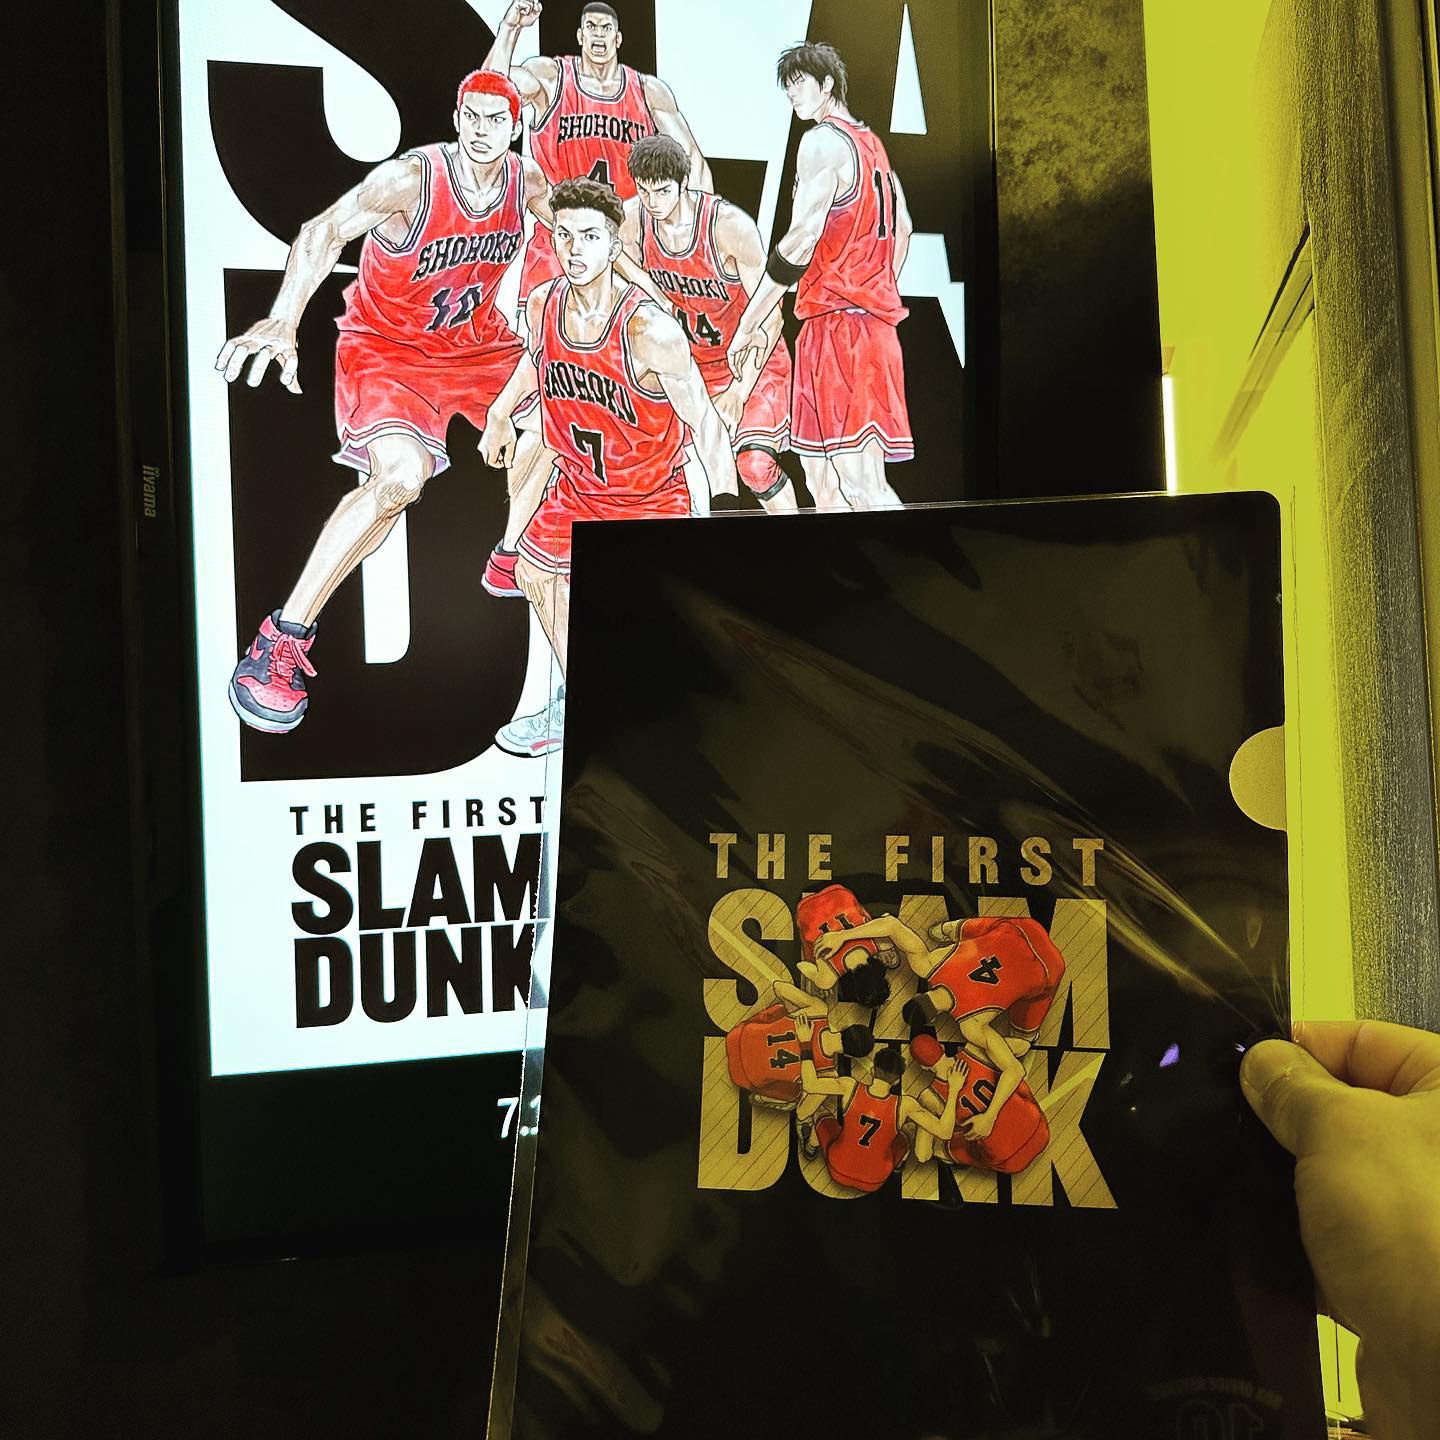 「THE FIRST SLAM DUNK」何度観てもアツイ！。クリアファイルゲット